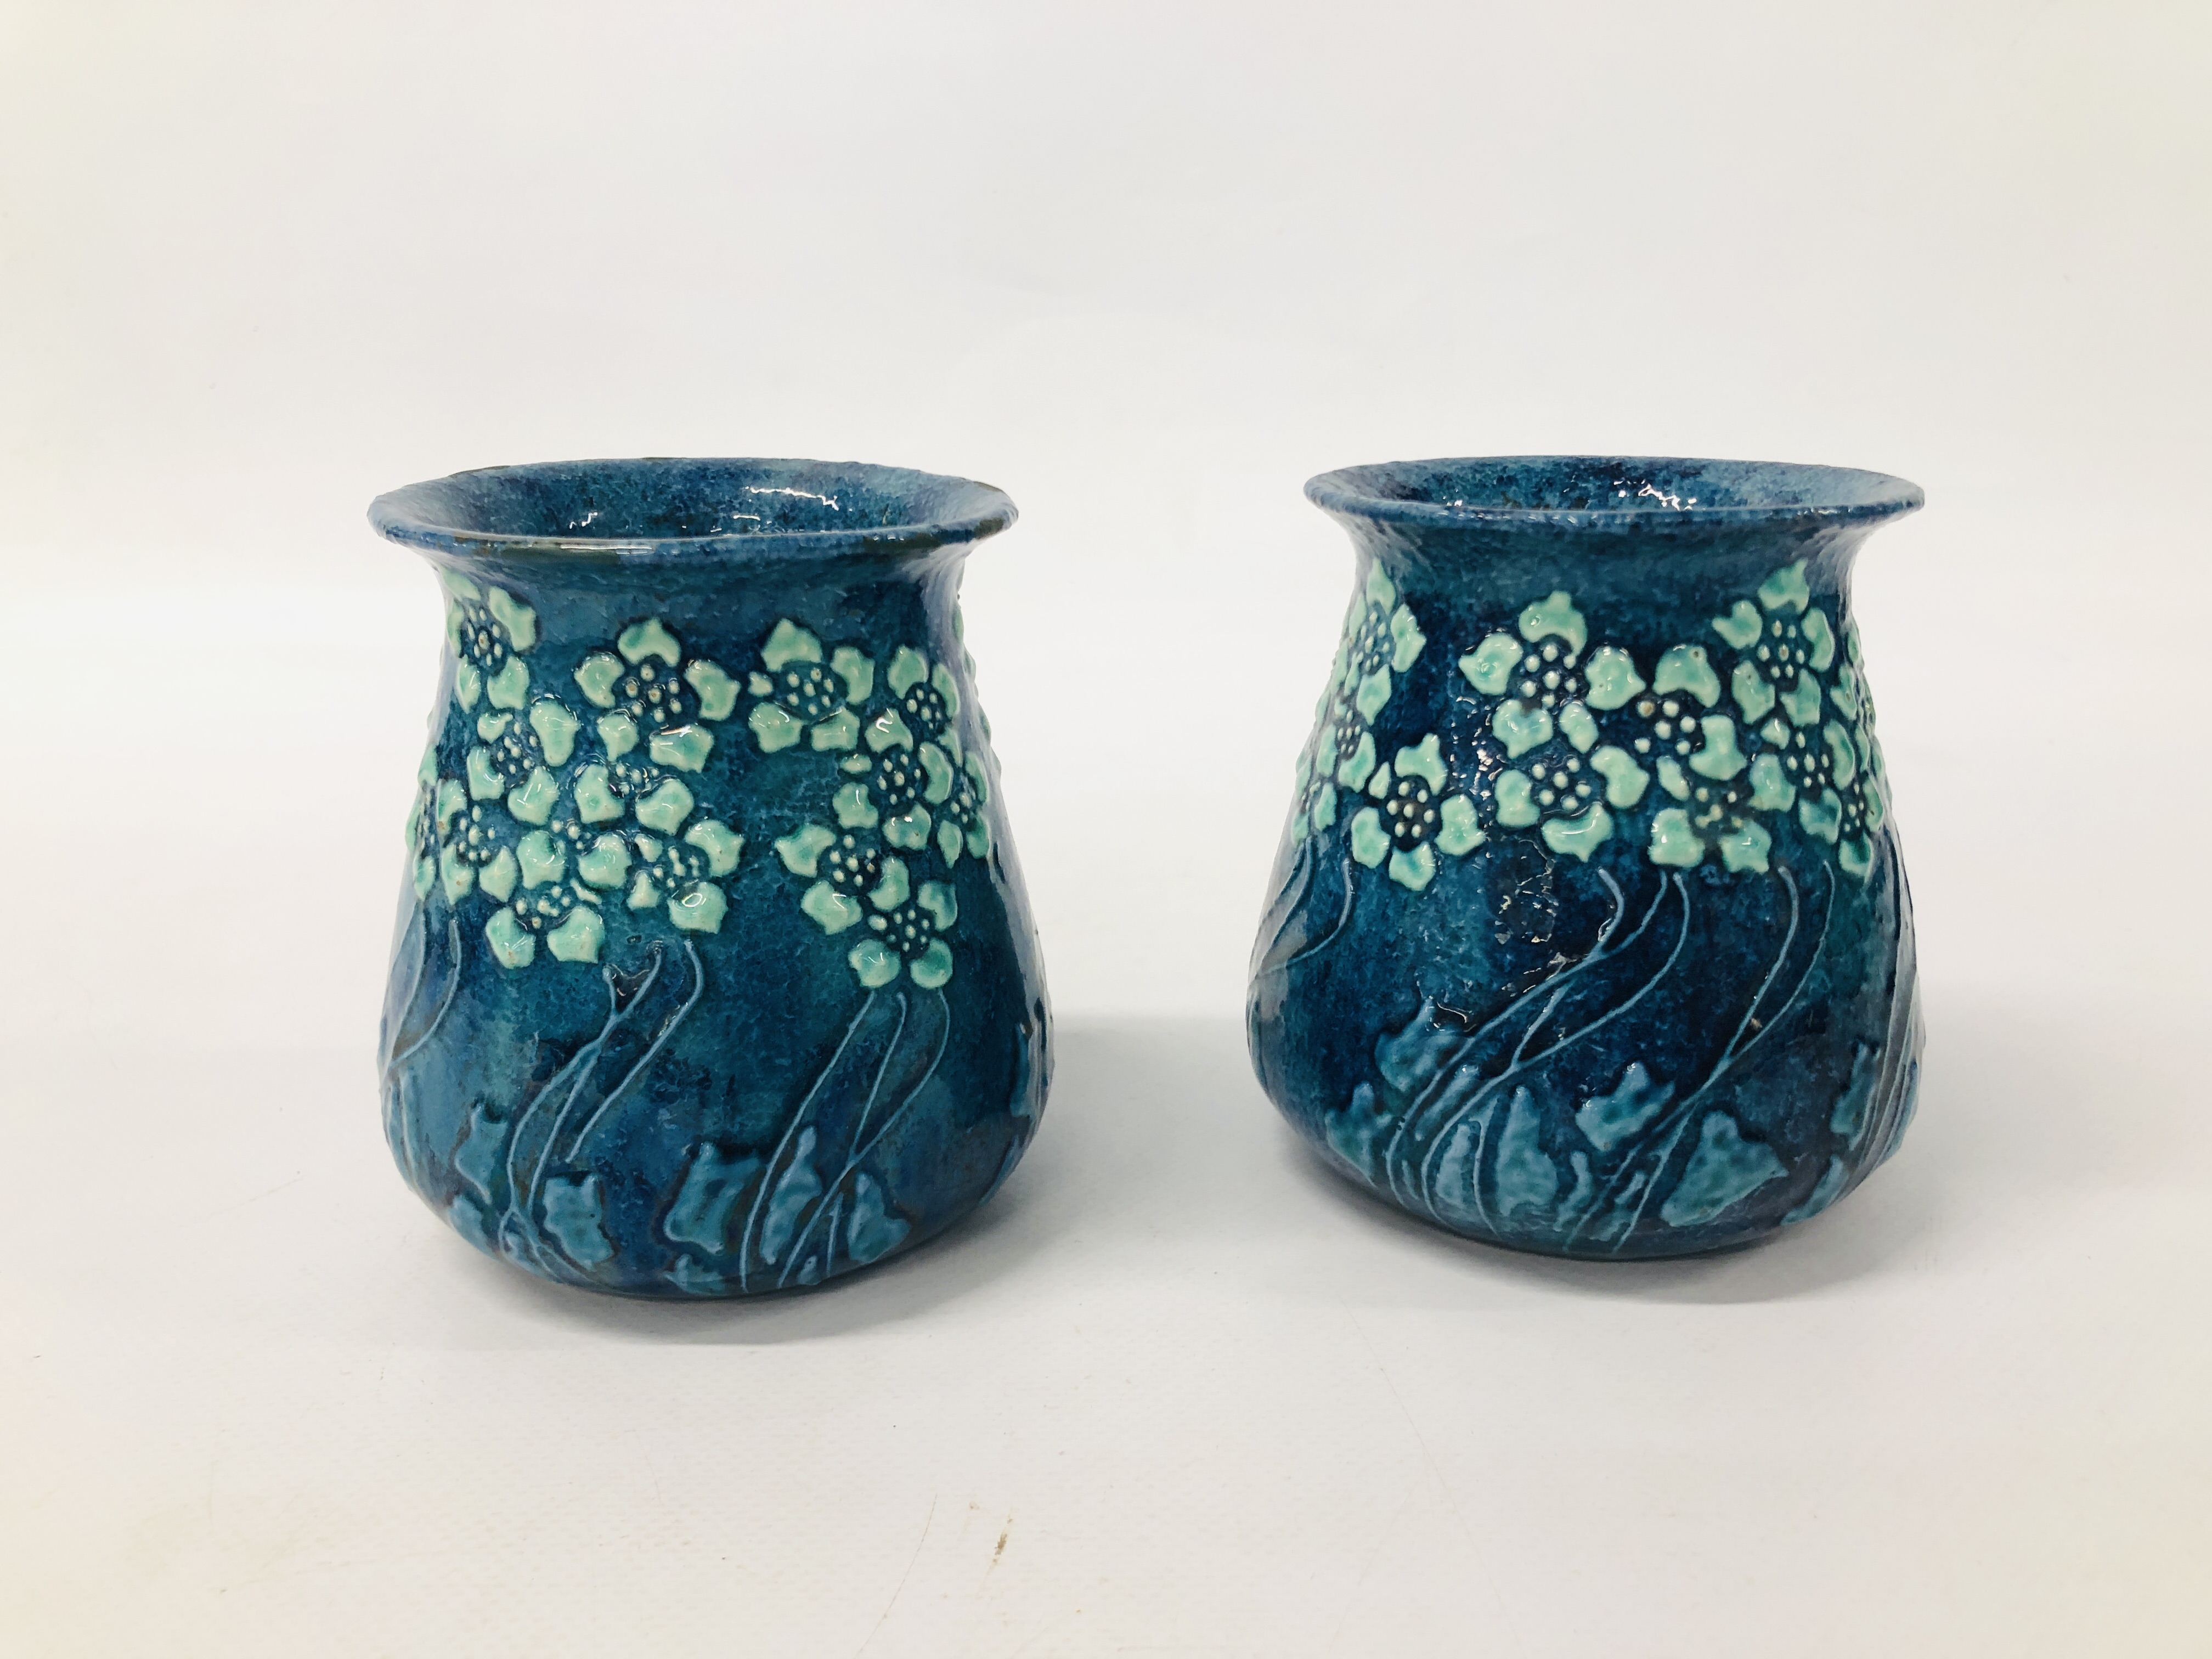 PAIR OF LIBERTY & CO. VASES BY FREDERICK RHEAD (SIGNS OF RESTORATION) HEIGHT 11CM.